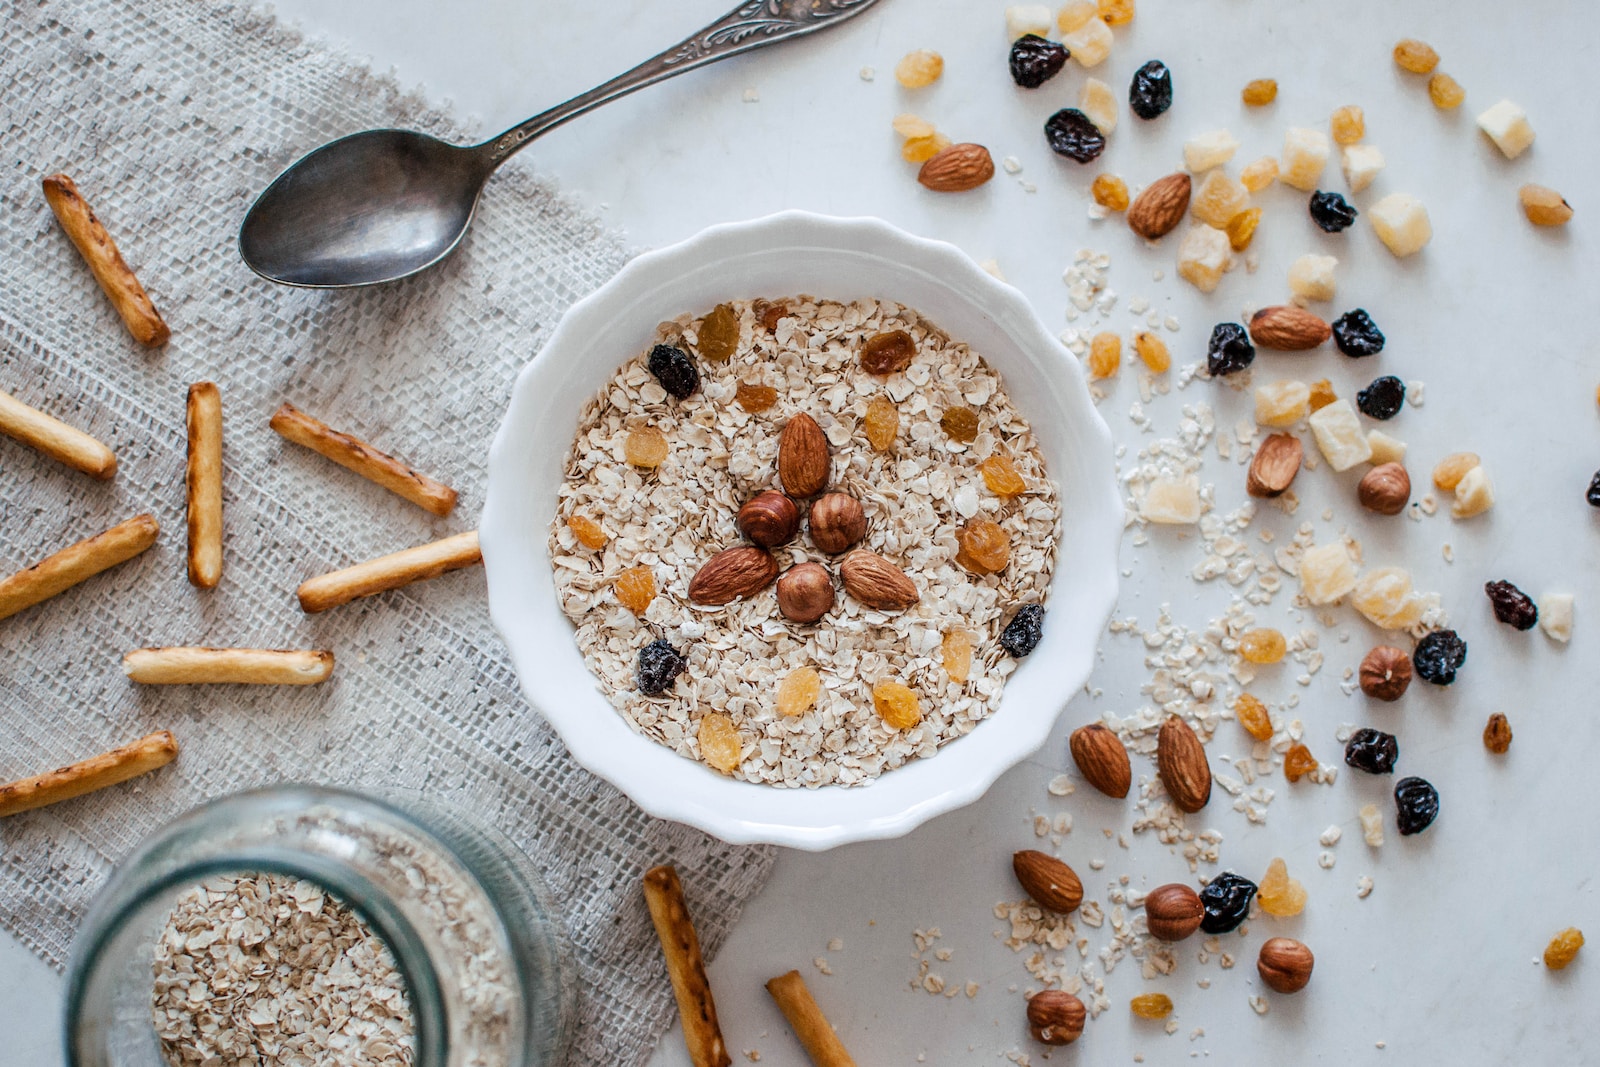 10 Health Benefits of Eating Oats and Oatmeal